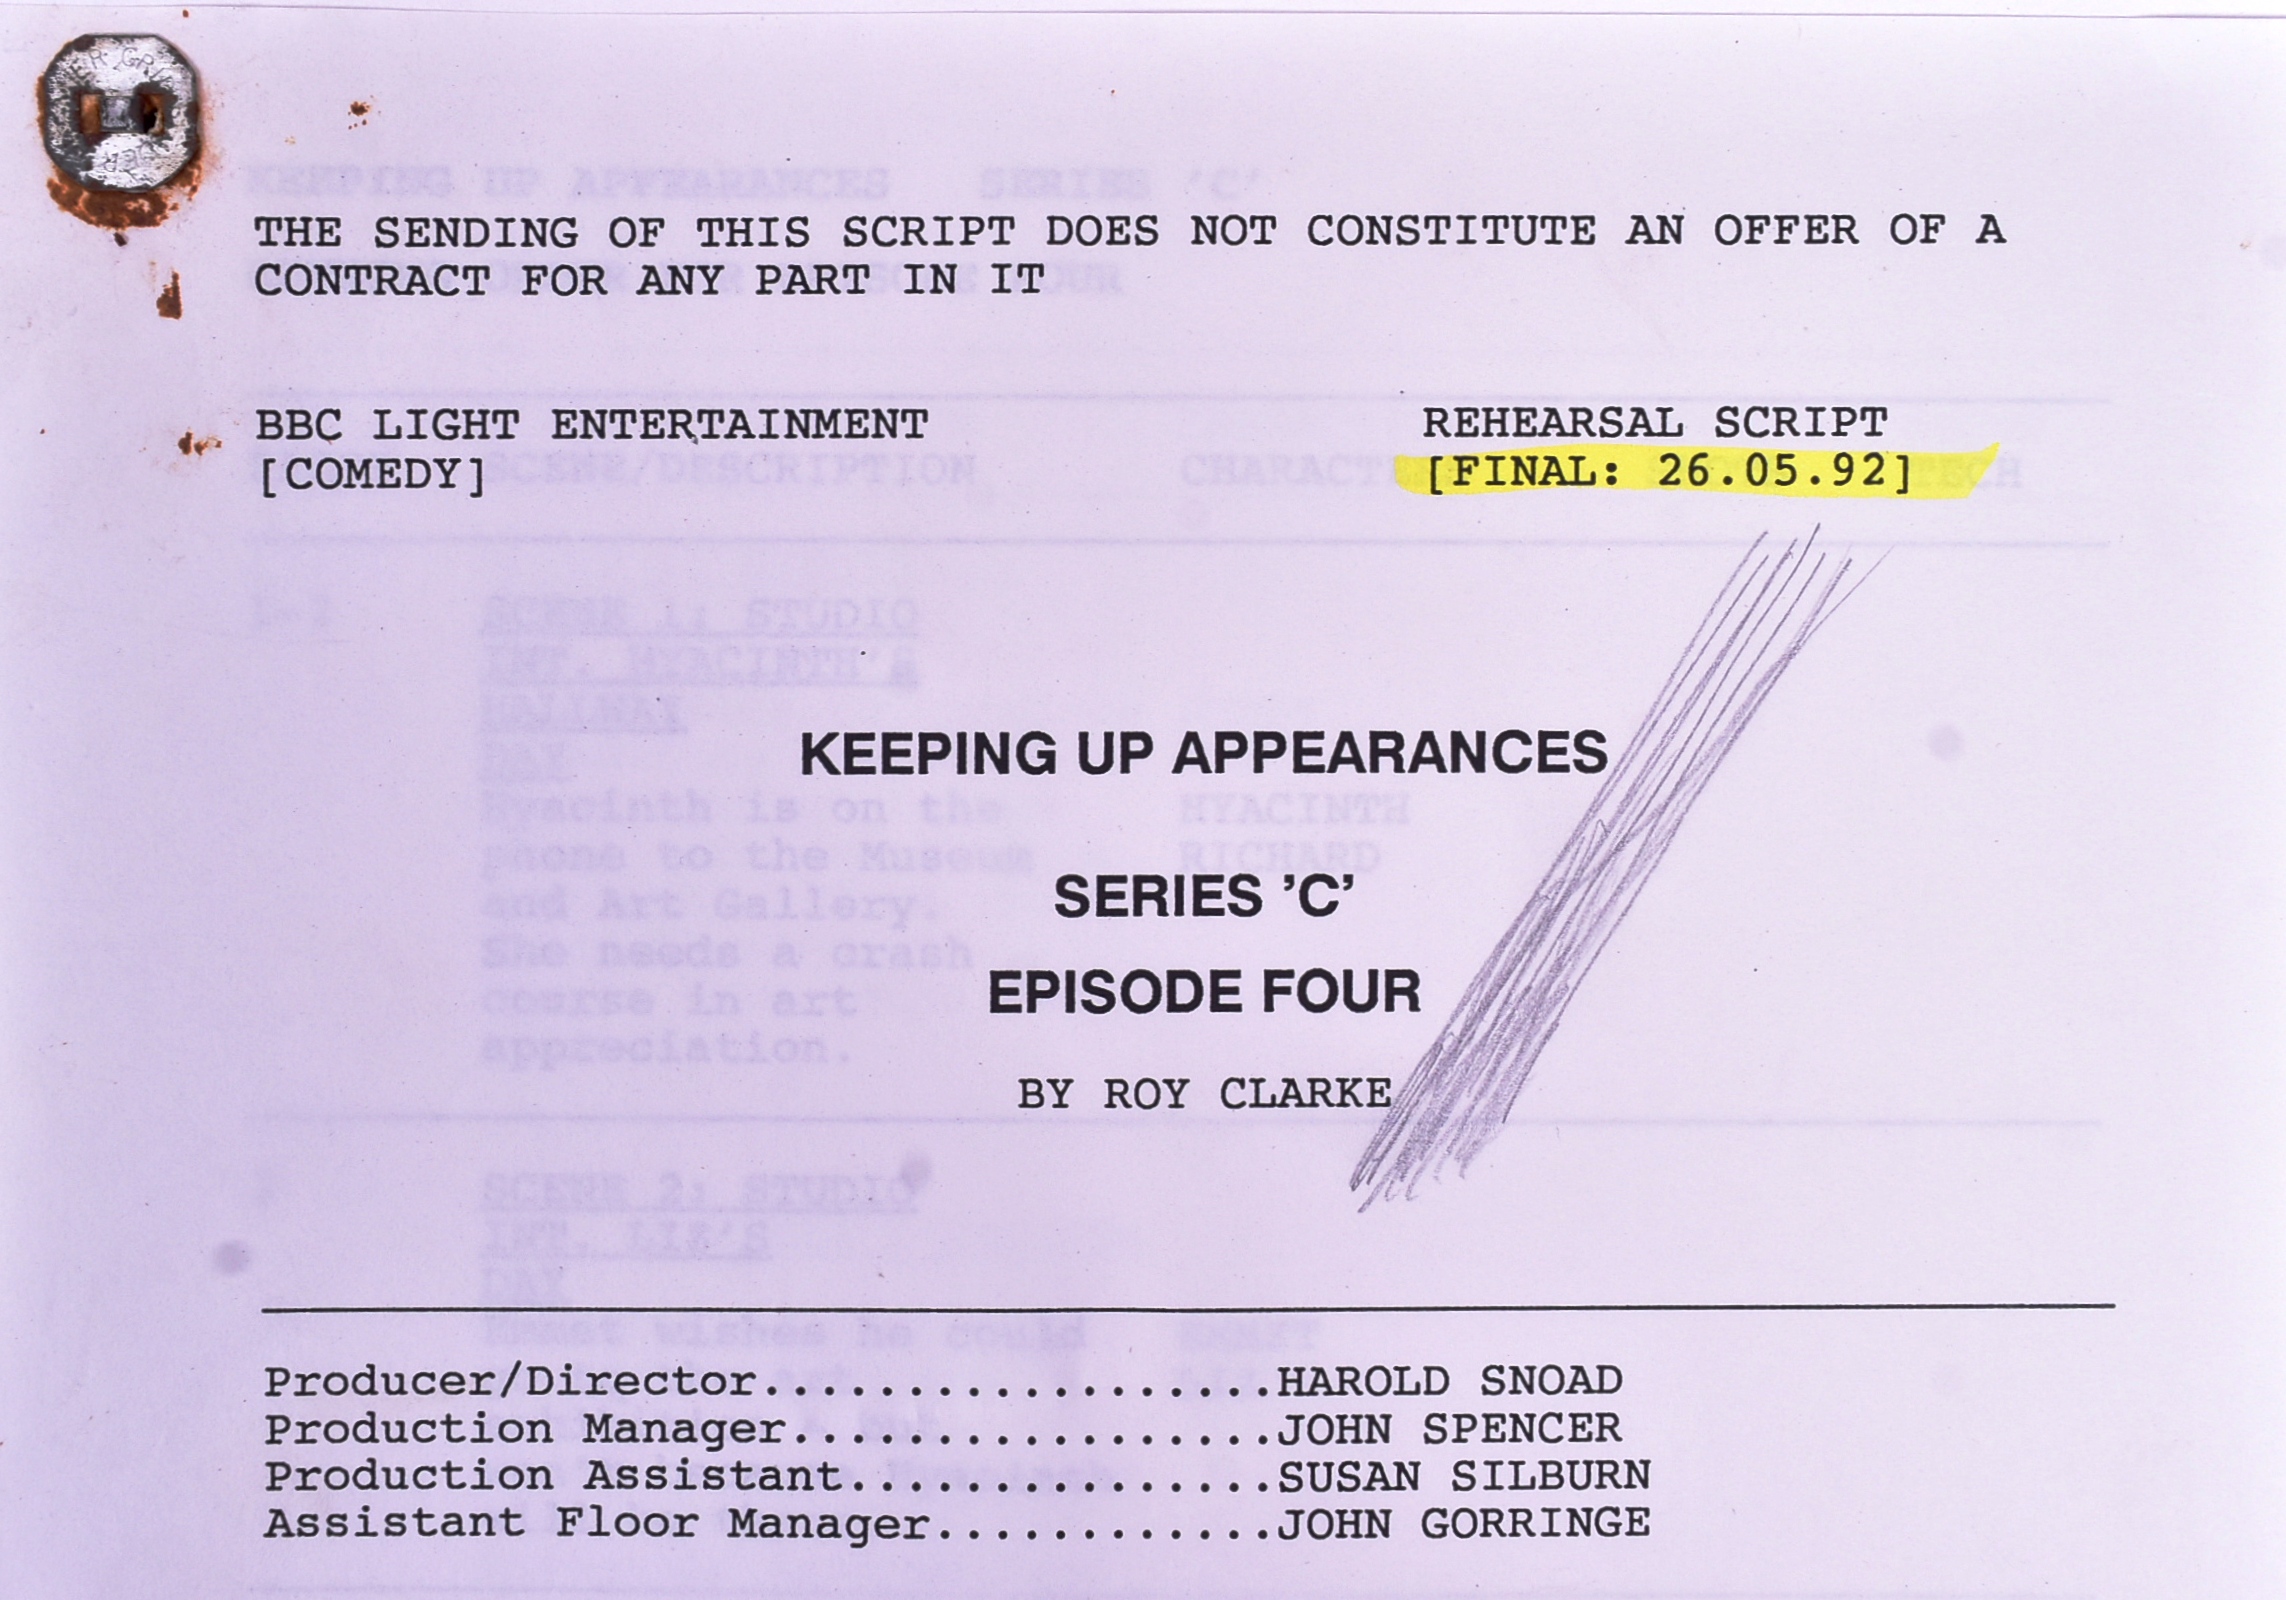 ORIGINAL KEEPING UP APPEARANCES PRODUCTION USED SCRIPT - Image 2 of 5